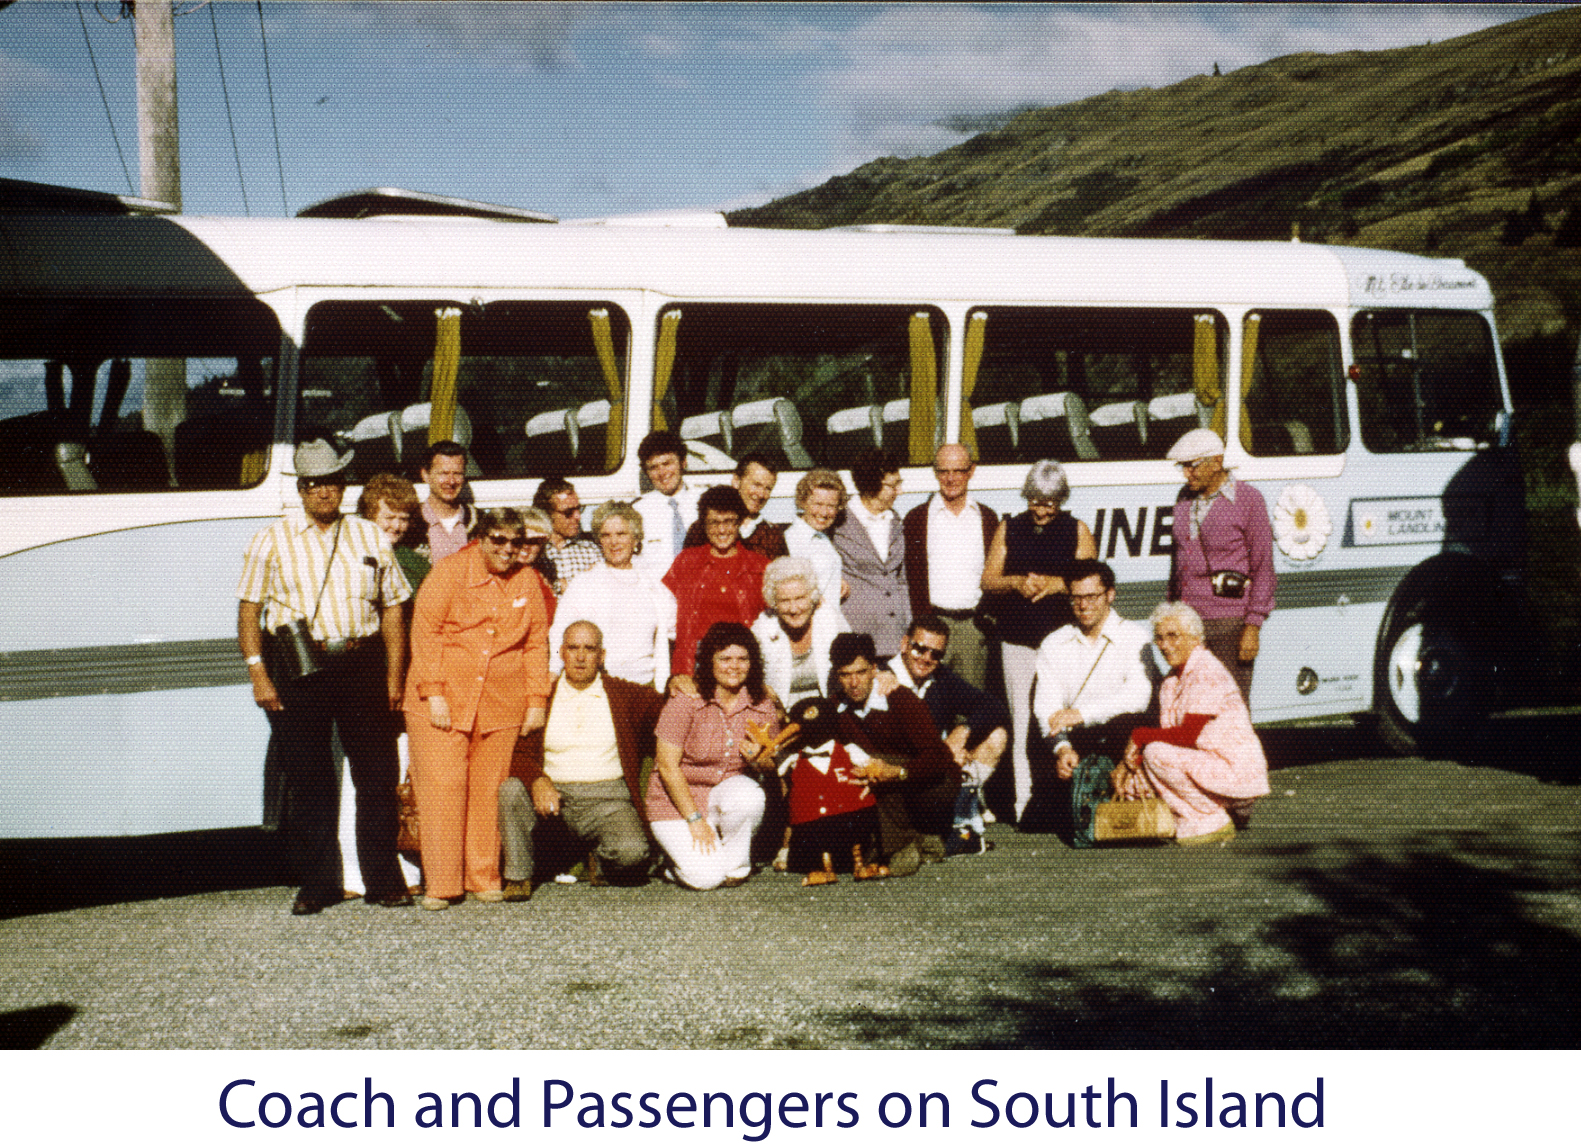 The Patons and Al Holm with the other passengers alongside the coach 
on which we traveled on South Island, New Zealand. Gail took the photo and is not in
the picture